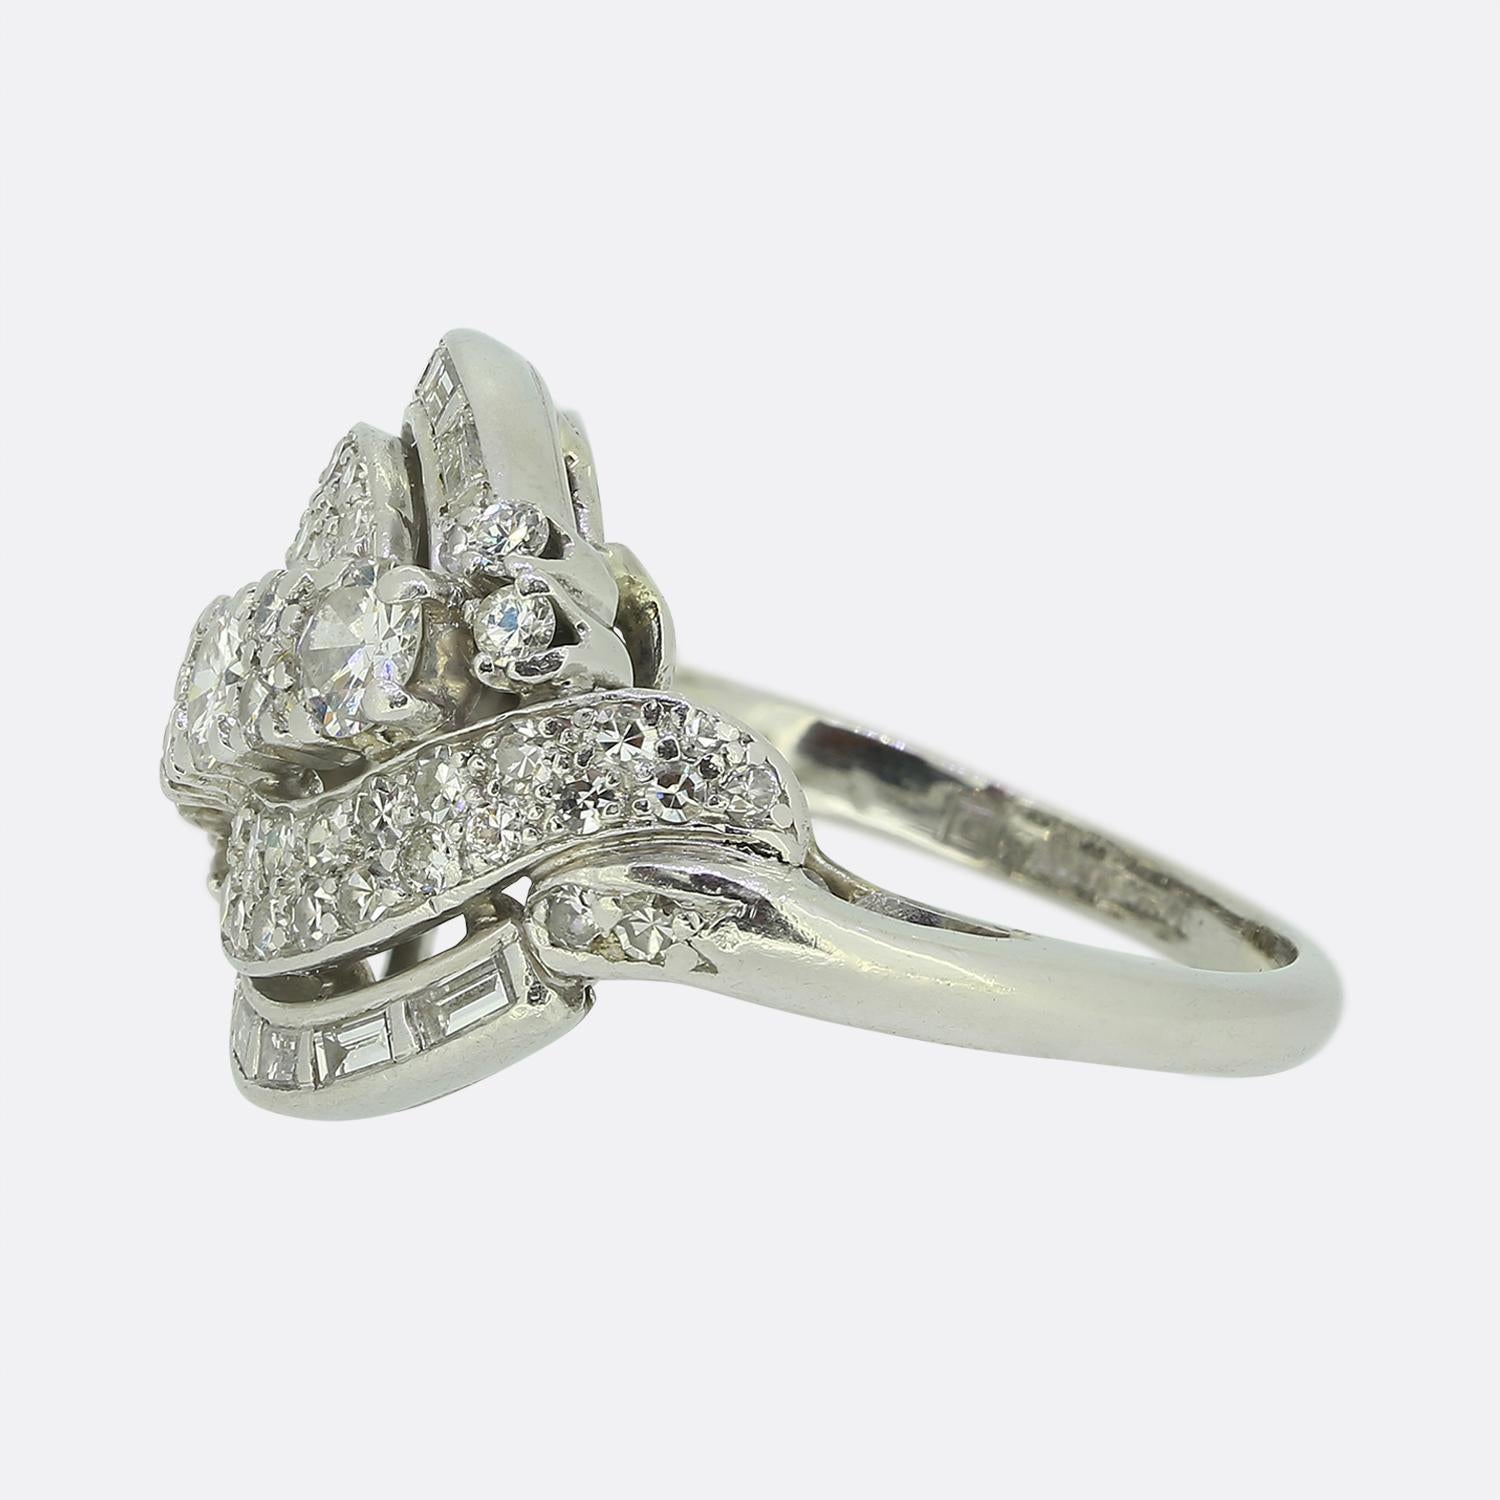 This is a truly wonderful diamond ring that dates back to approximately 1940. The ring is crafted n platinum and features a mix of old European, eight and baguette cut diamonds. The three largest round diamonds are old European and the smaller ones